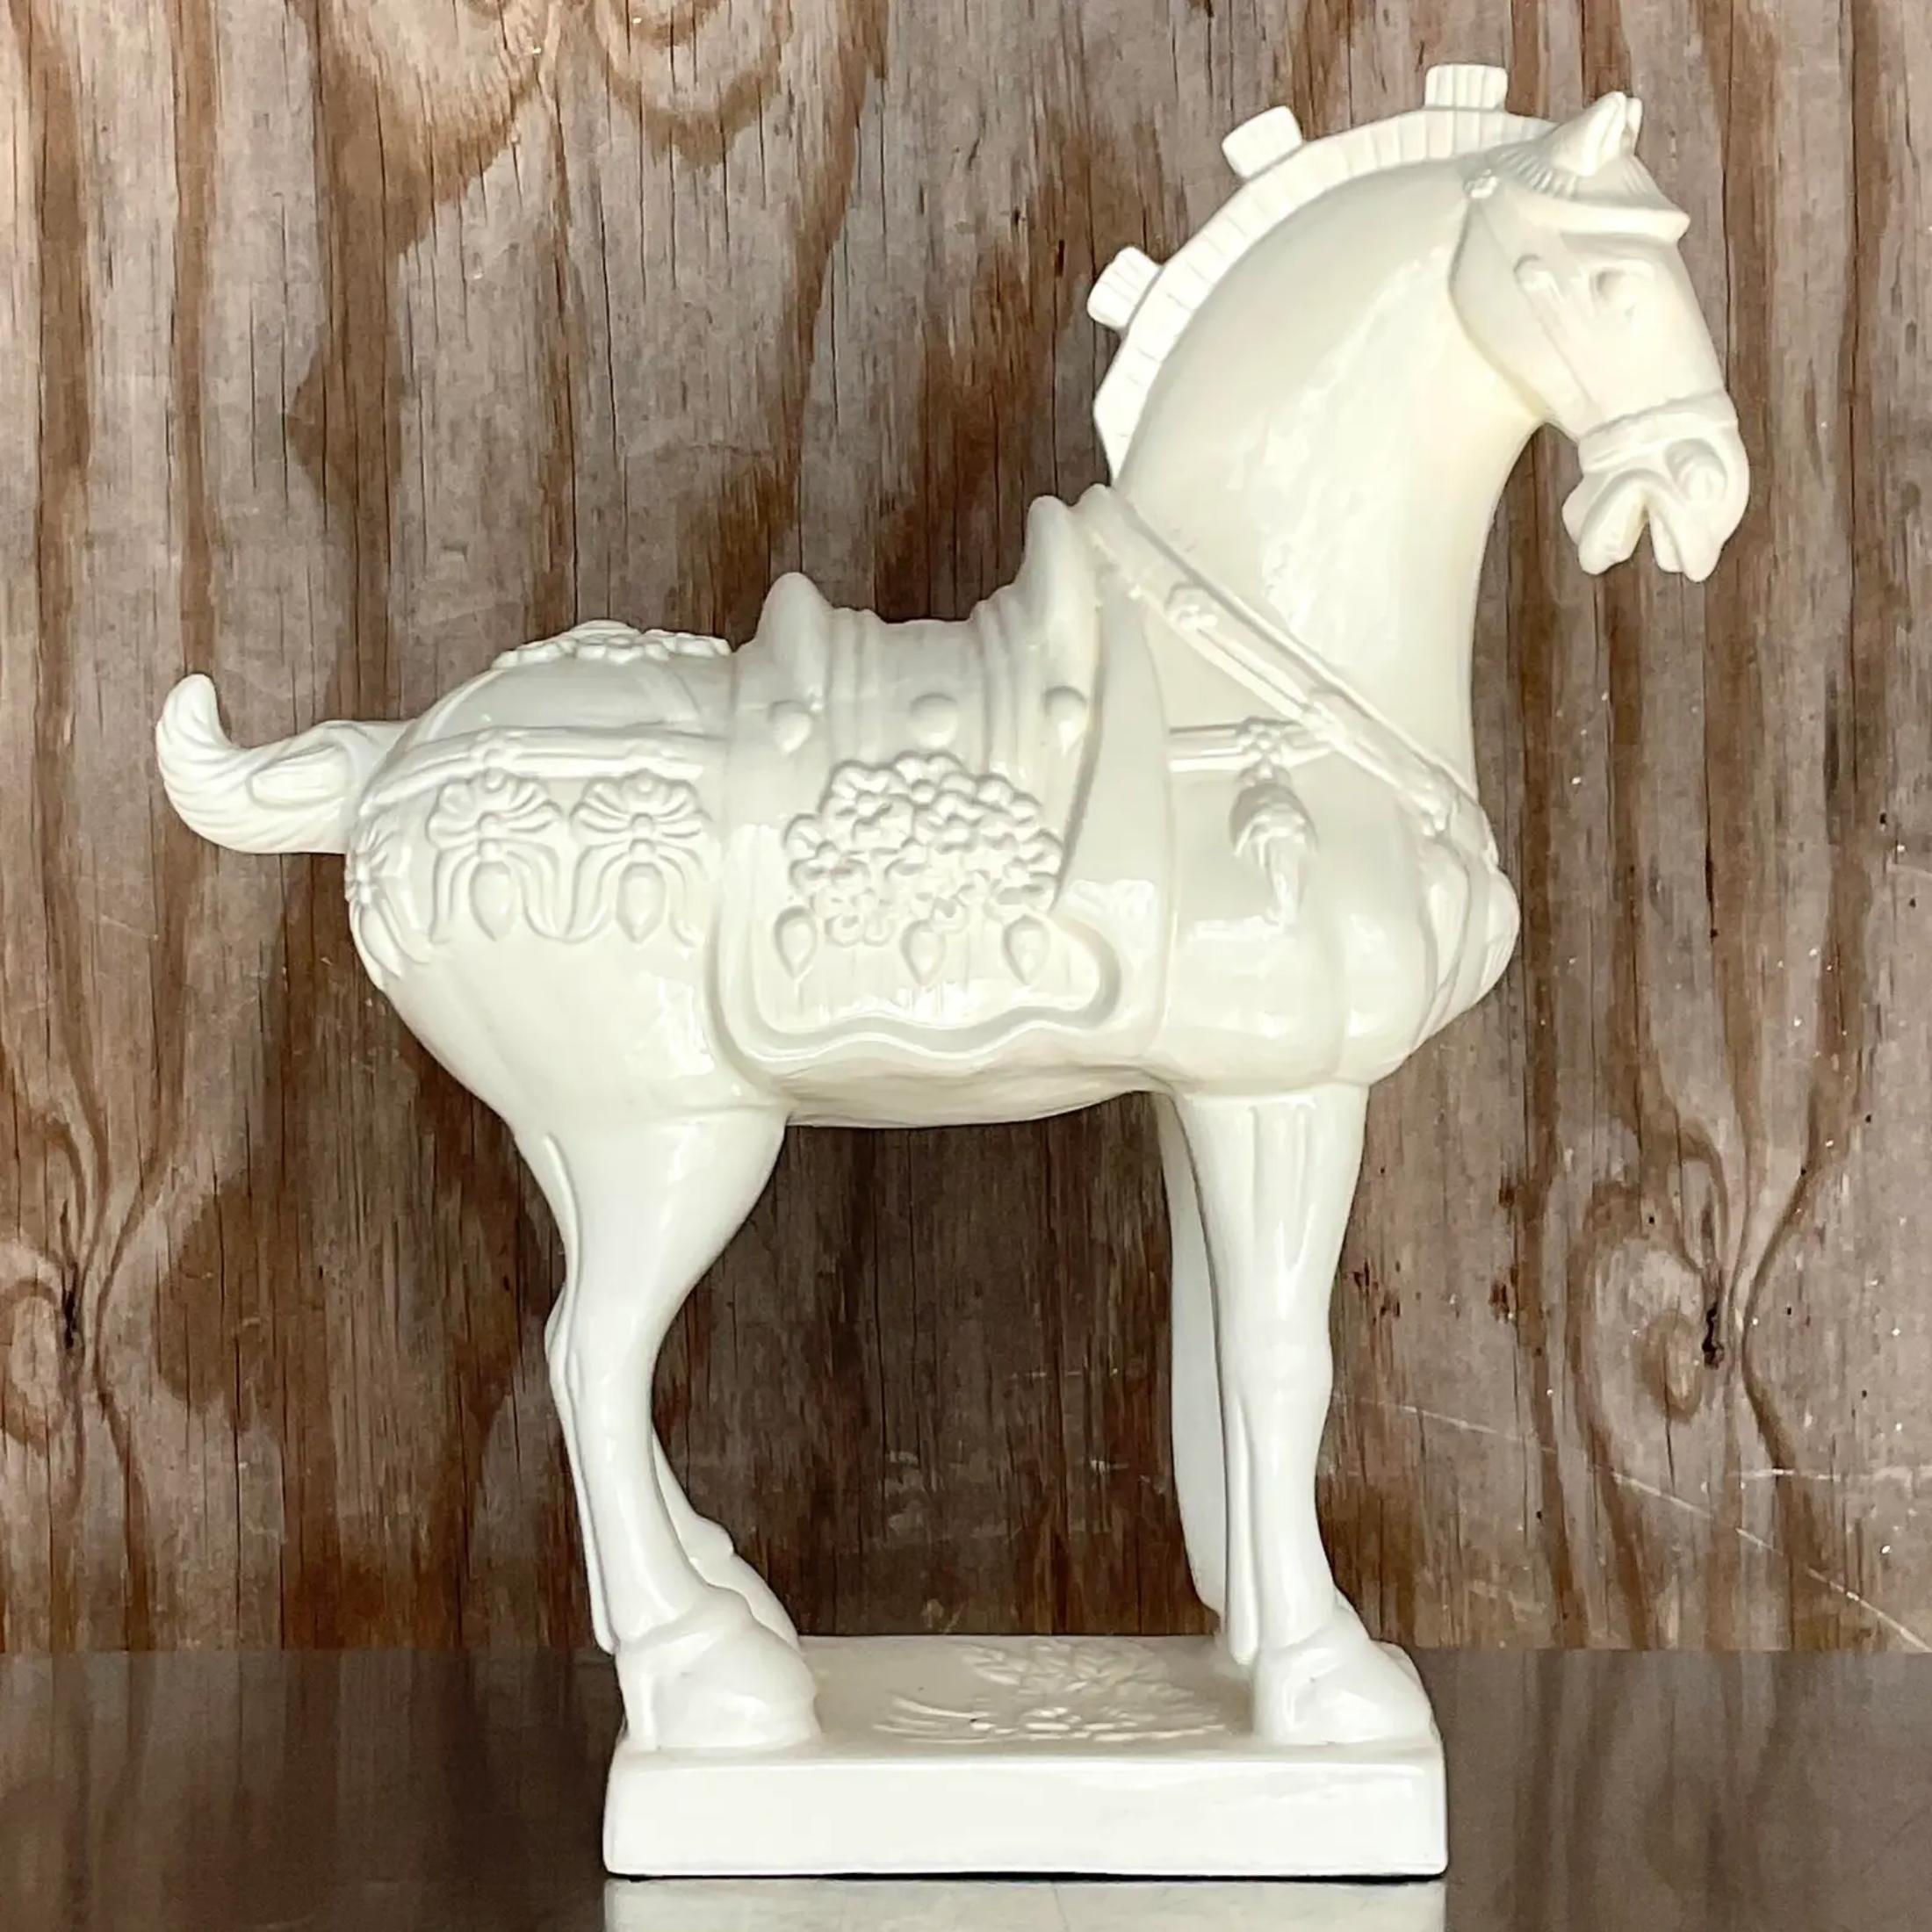 A fabulous vintage Asian glazed ceramic horse. Done in the style of the Tang Dynasty. Beautiful glossy off white finish. Acquired from a Palm Beach estate